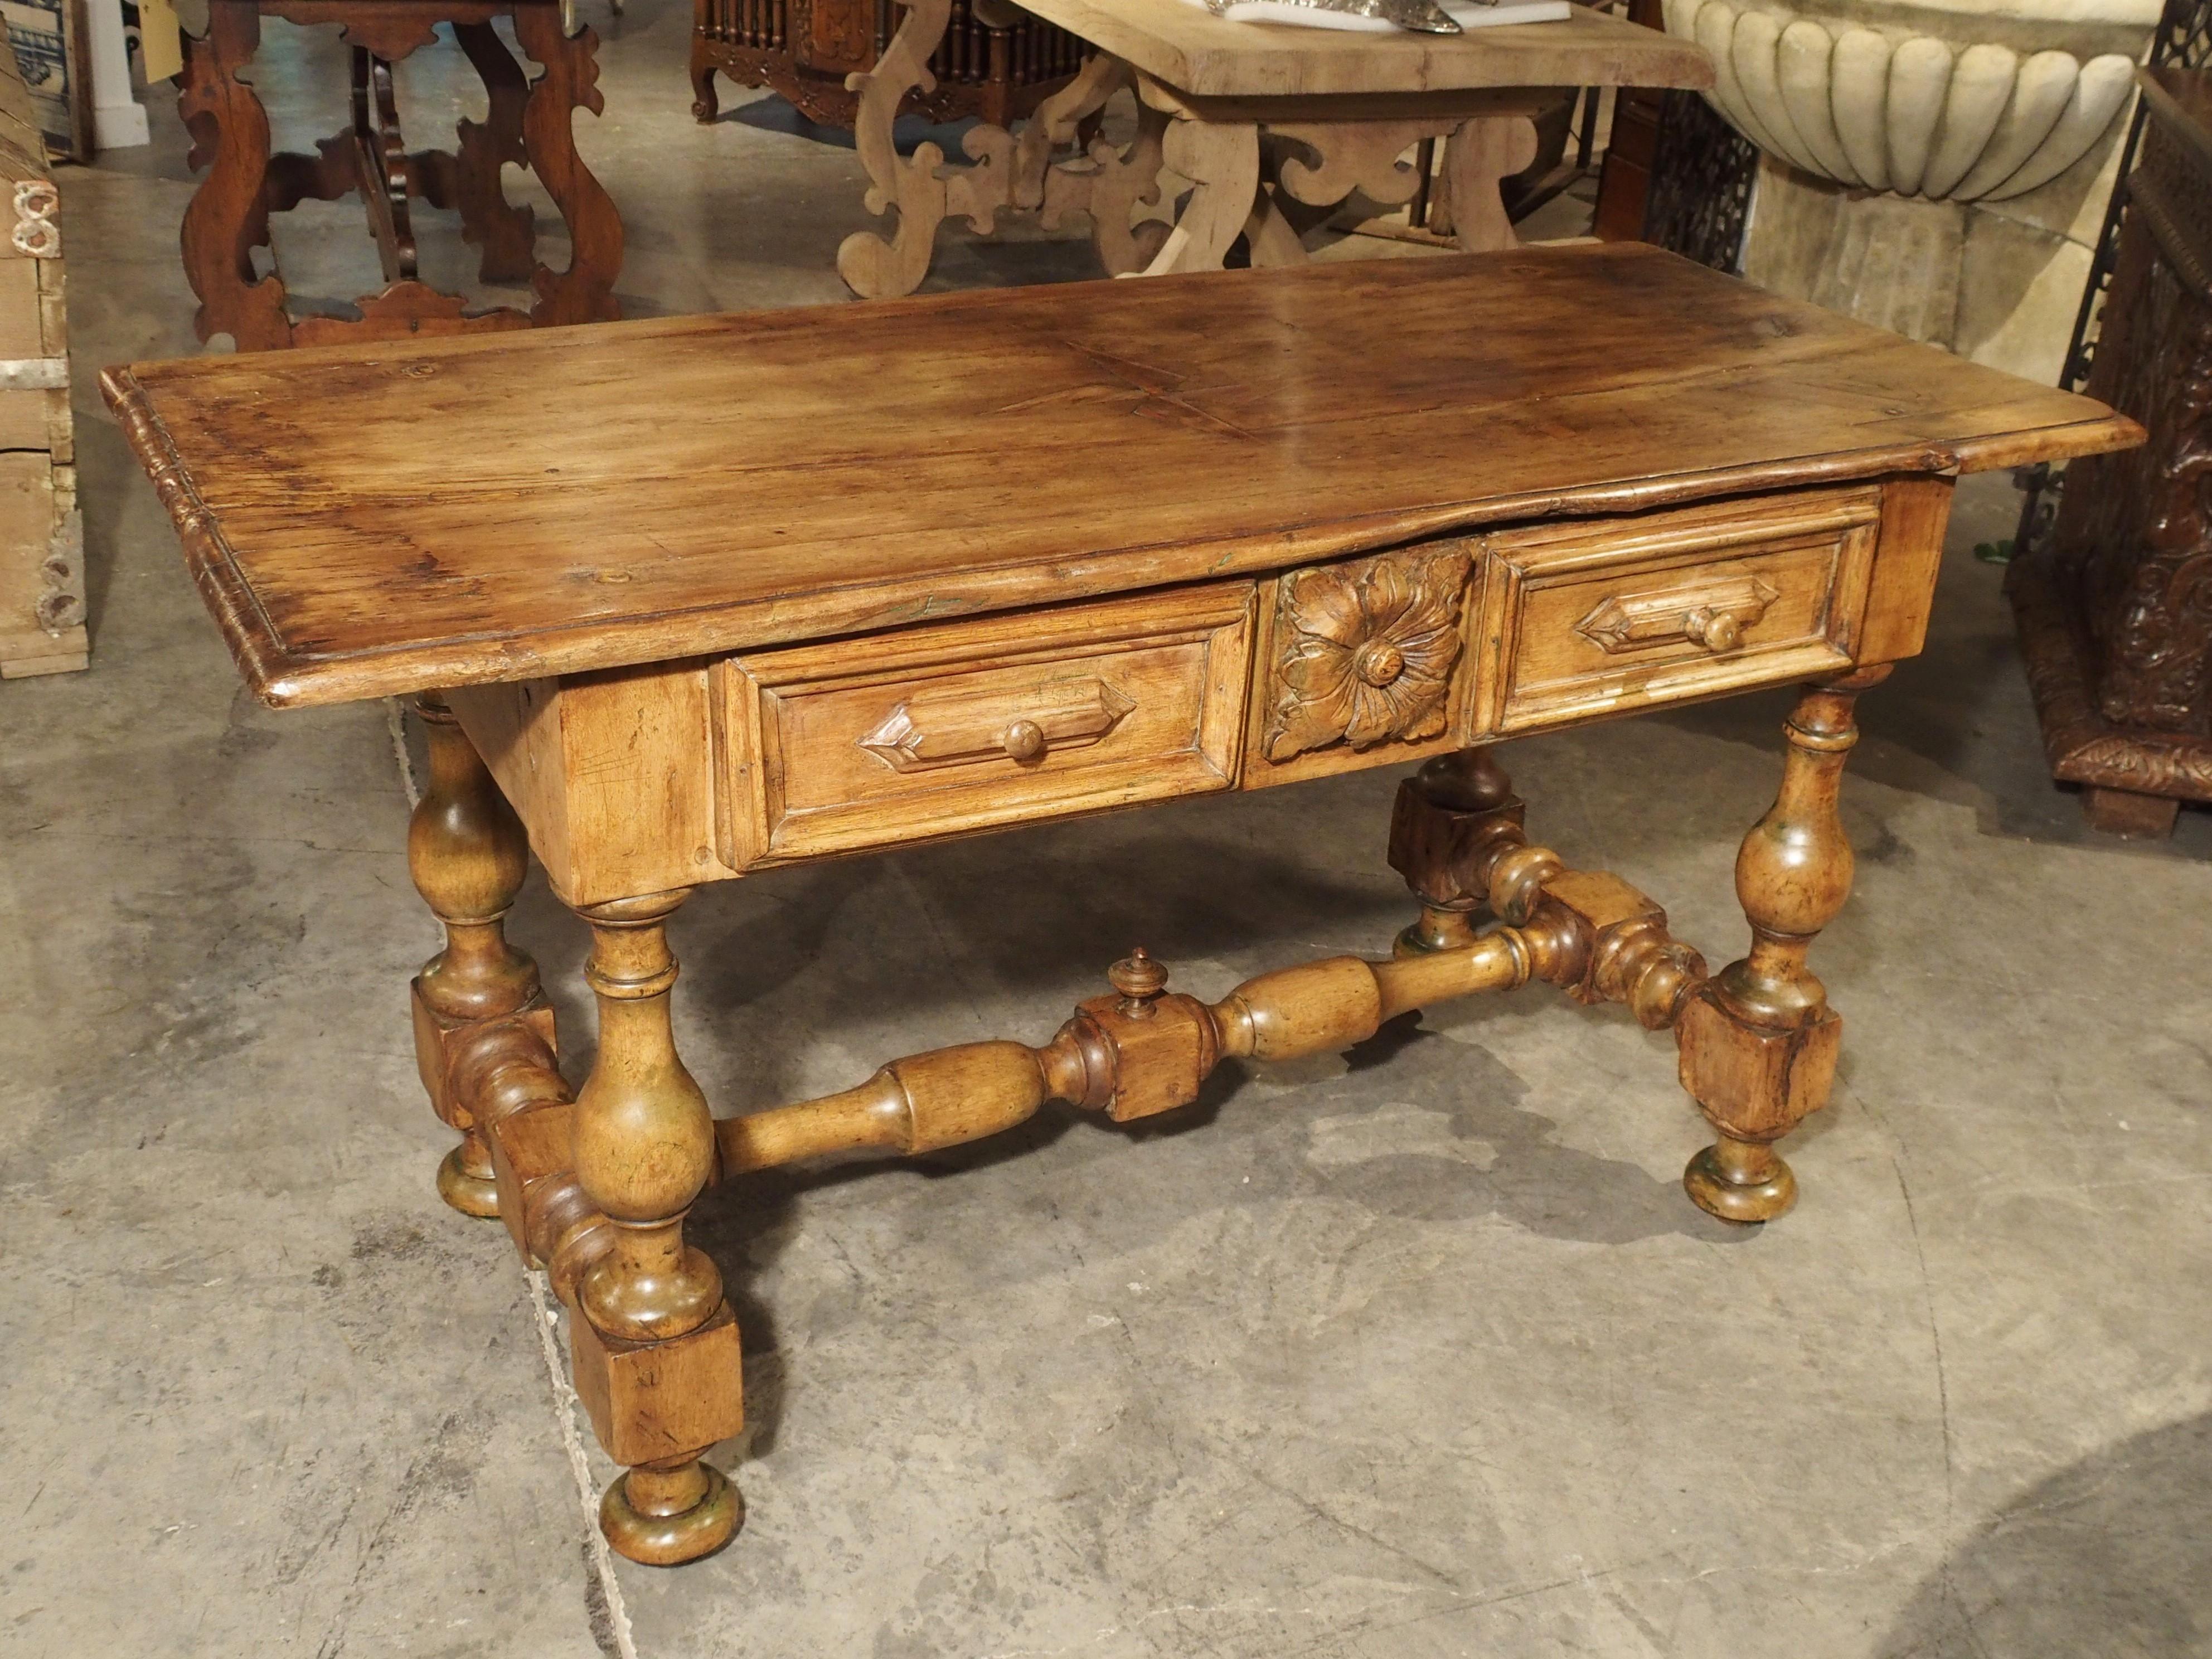 18th Century and Earlier 17th Century Basque Country Writing Table with Inset Star